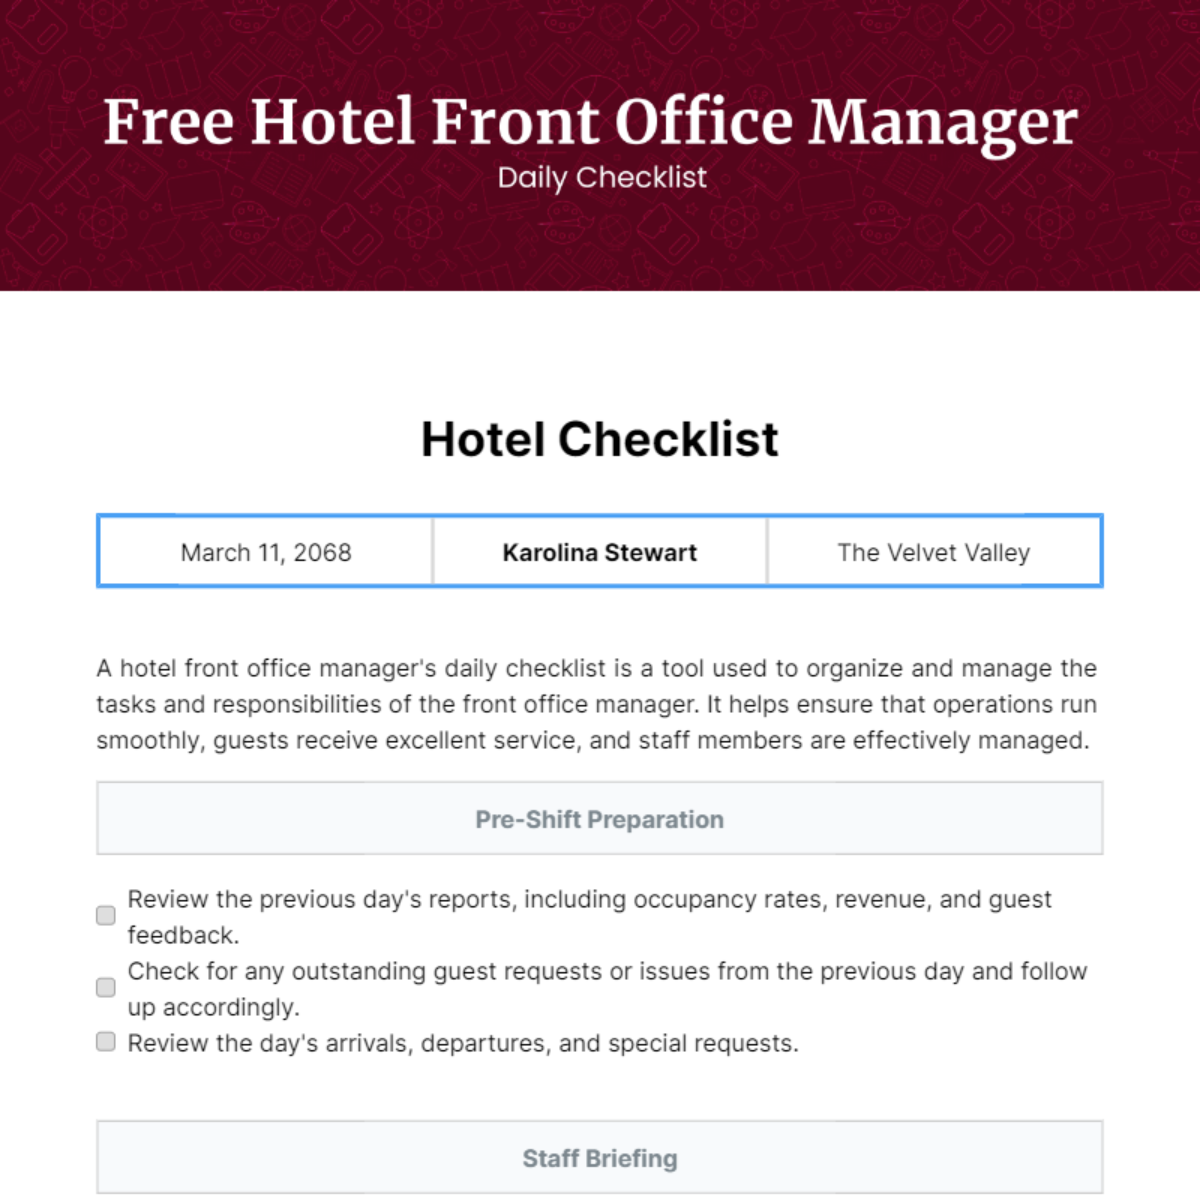 Free Hotel Front Office Manager Daily Checklist Template